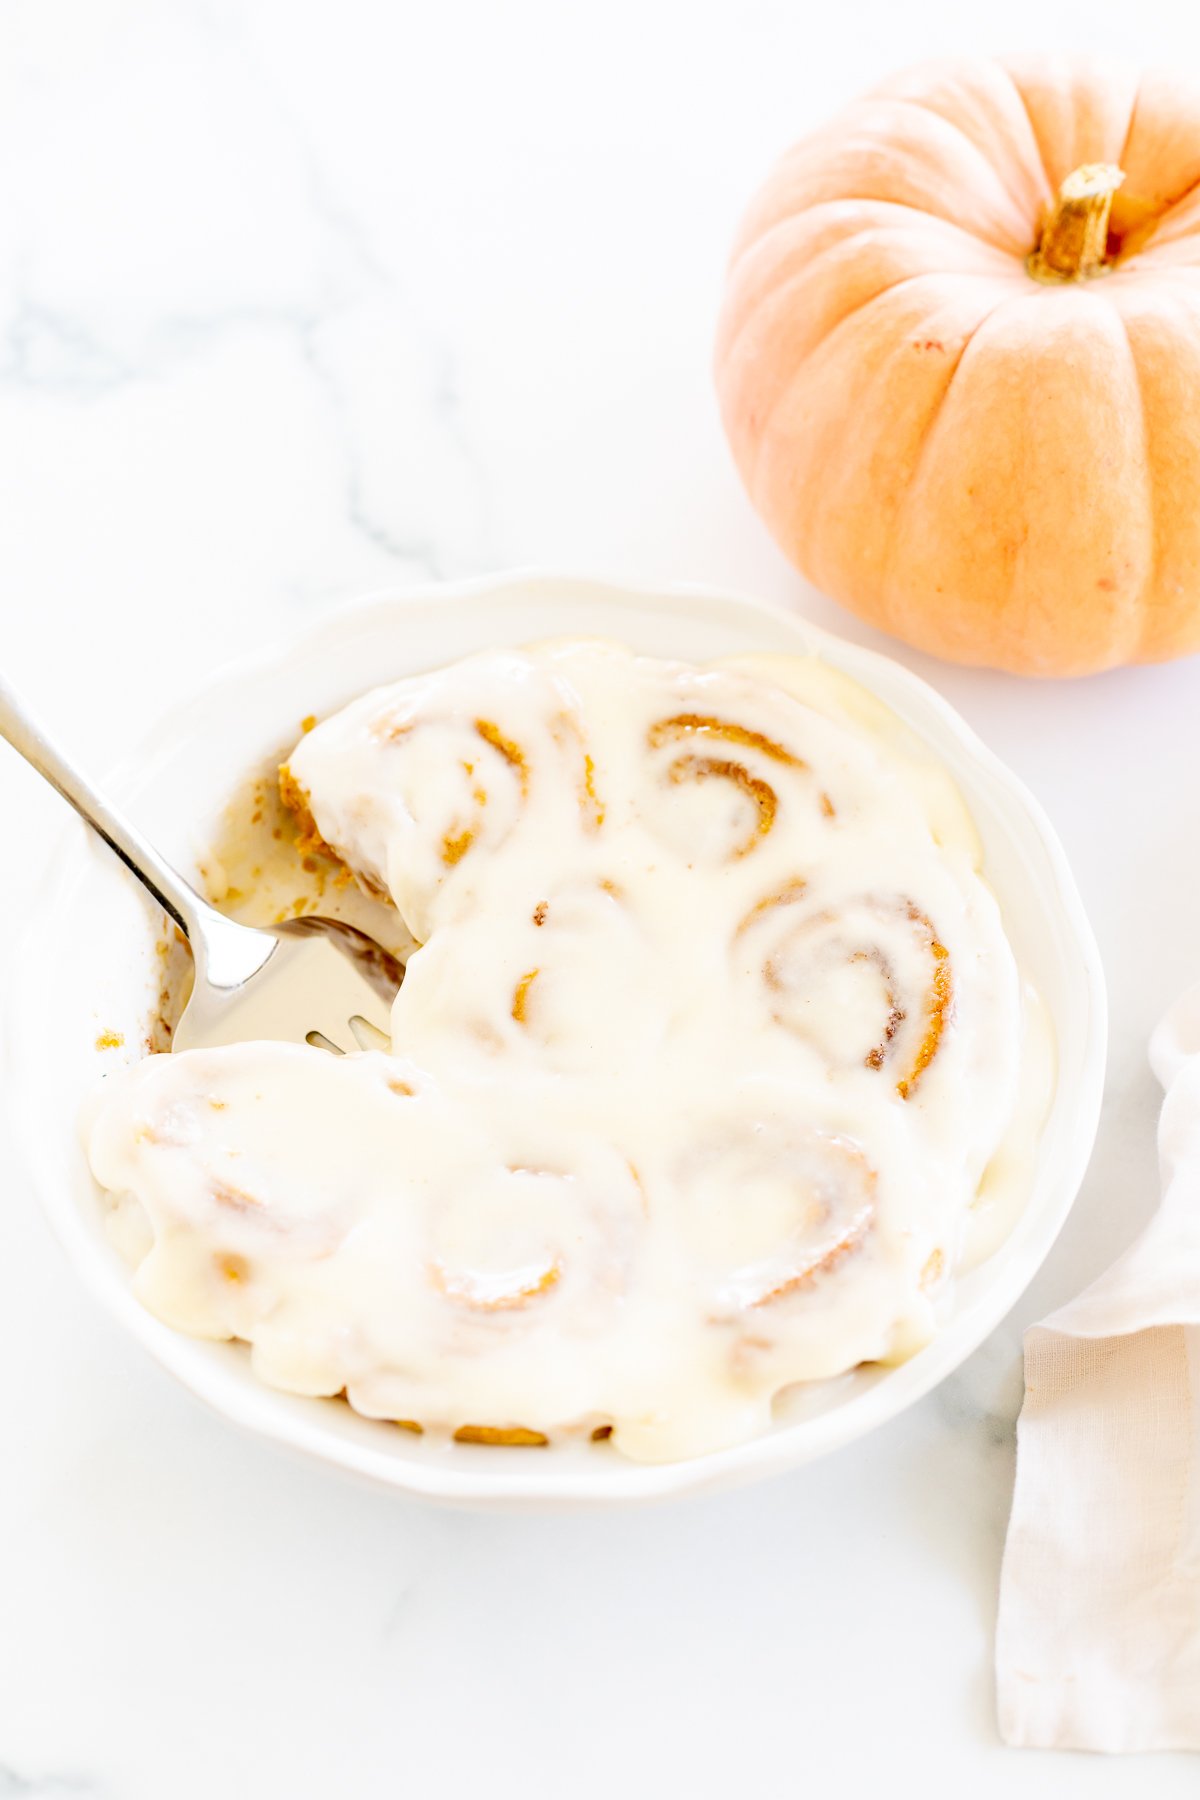 A plate of Pumpkin Cinnamon Rolls with cream cheese frosting.